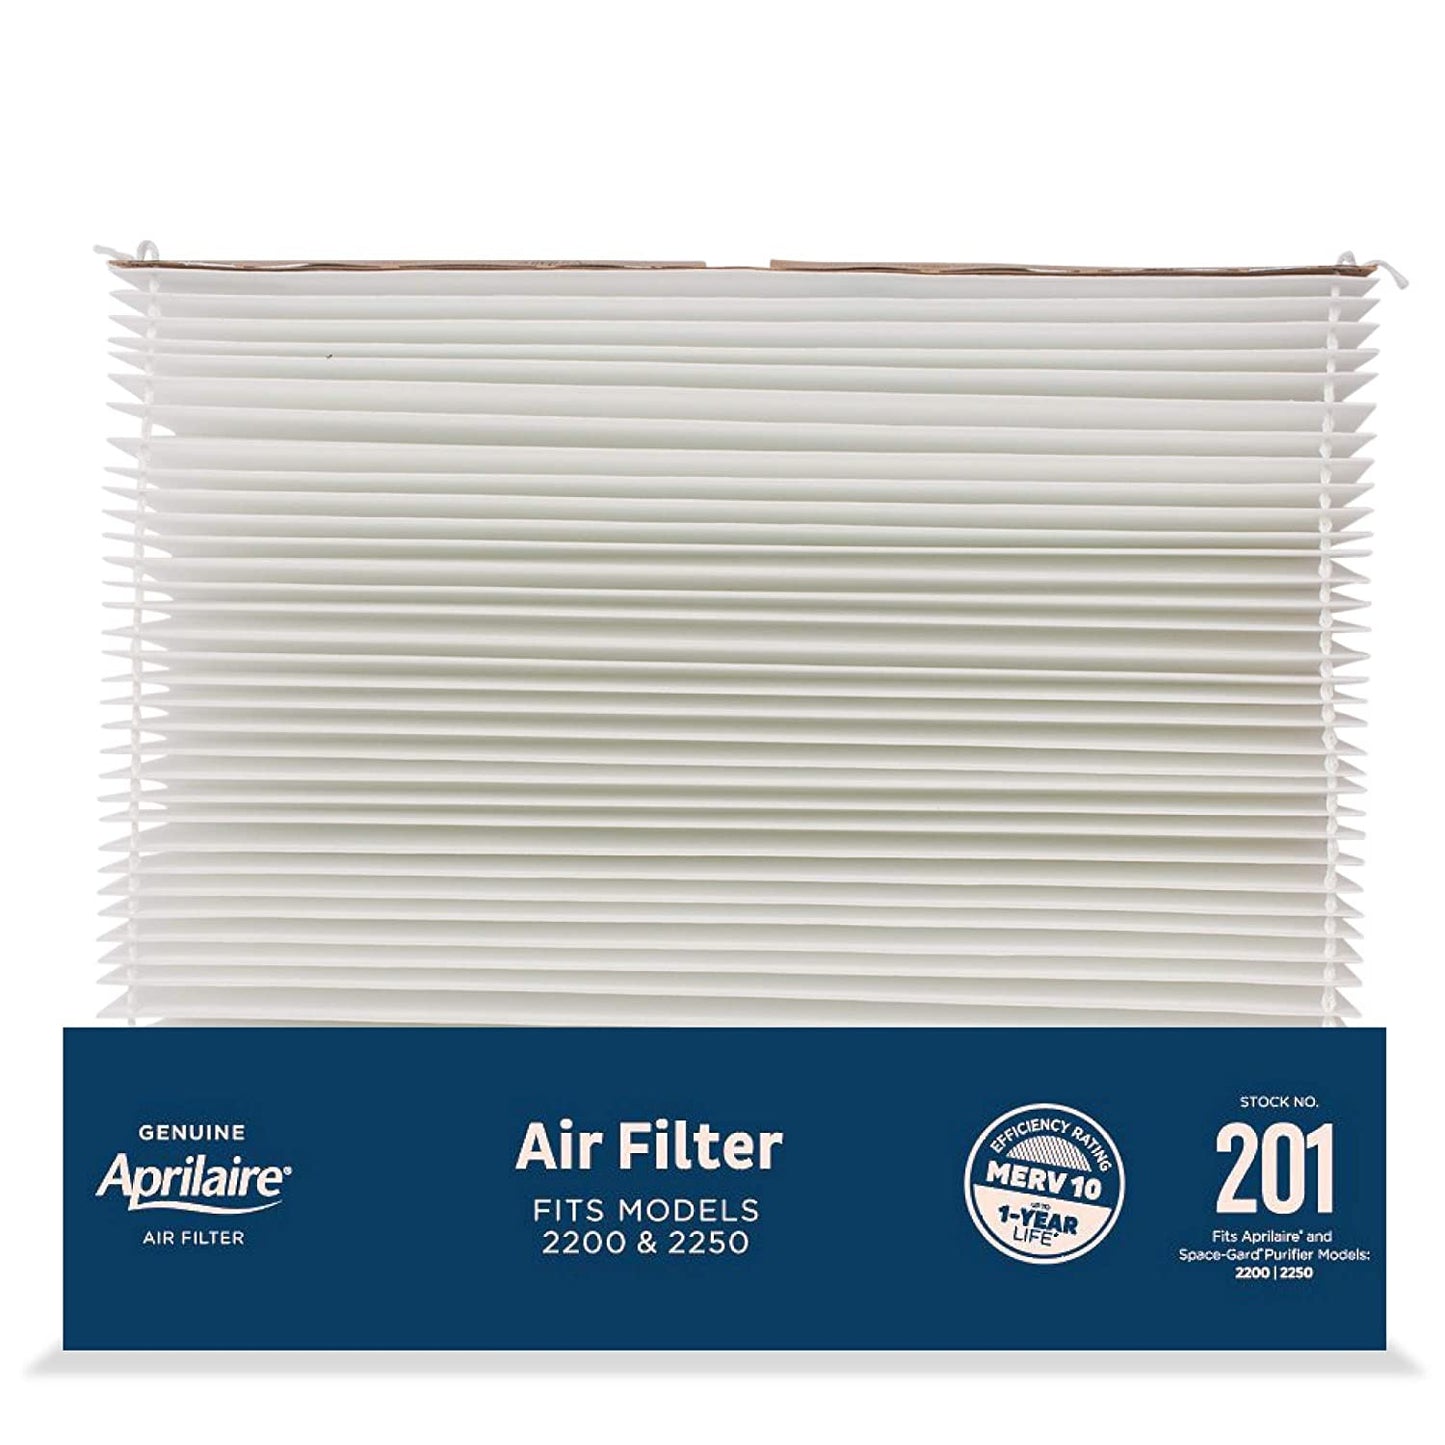 Aprilaire - 201 A1 201 Replacement Filter for Whole House Air Purifier Models: 2200, 2250, Space Gard 2200, MERV 10